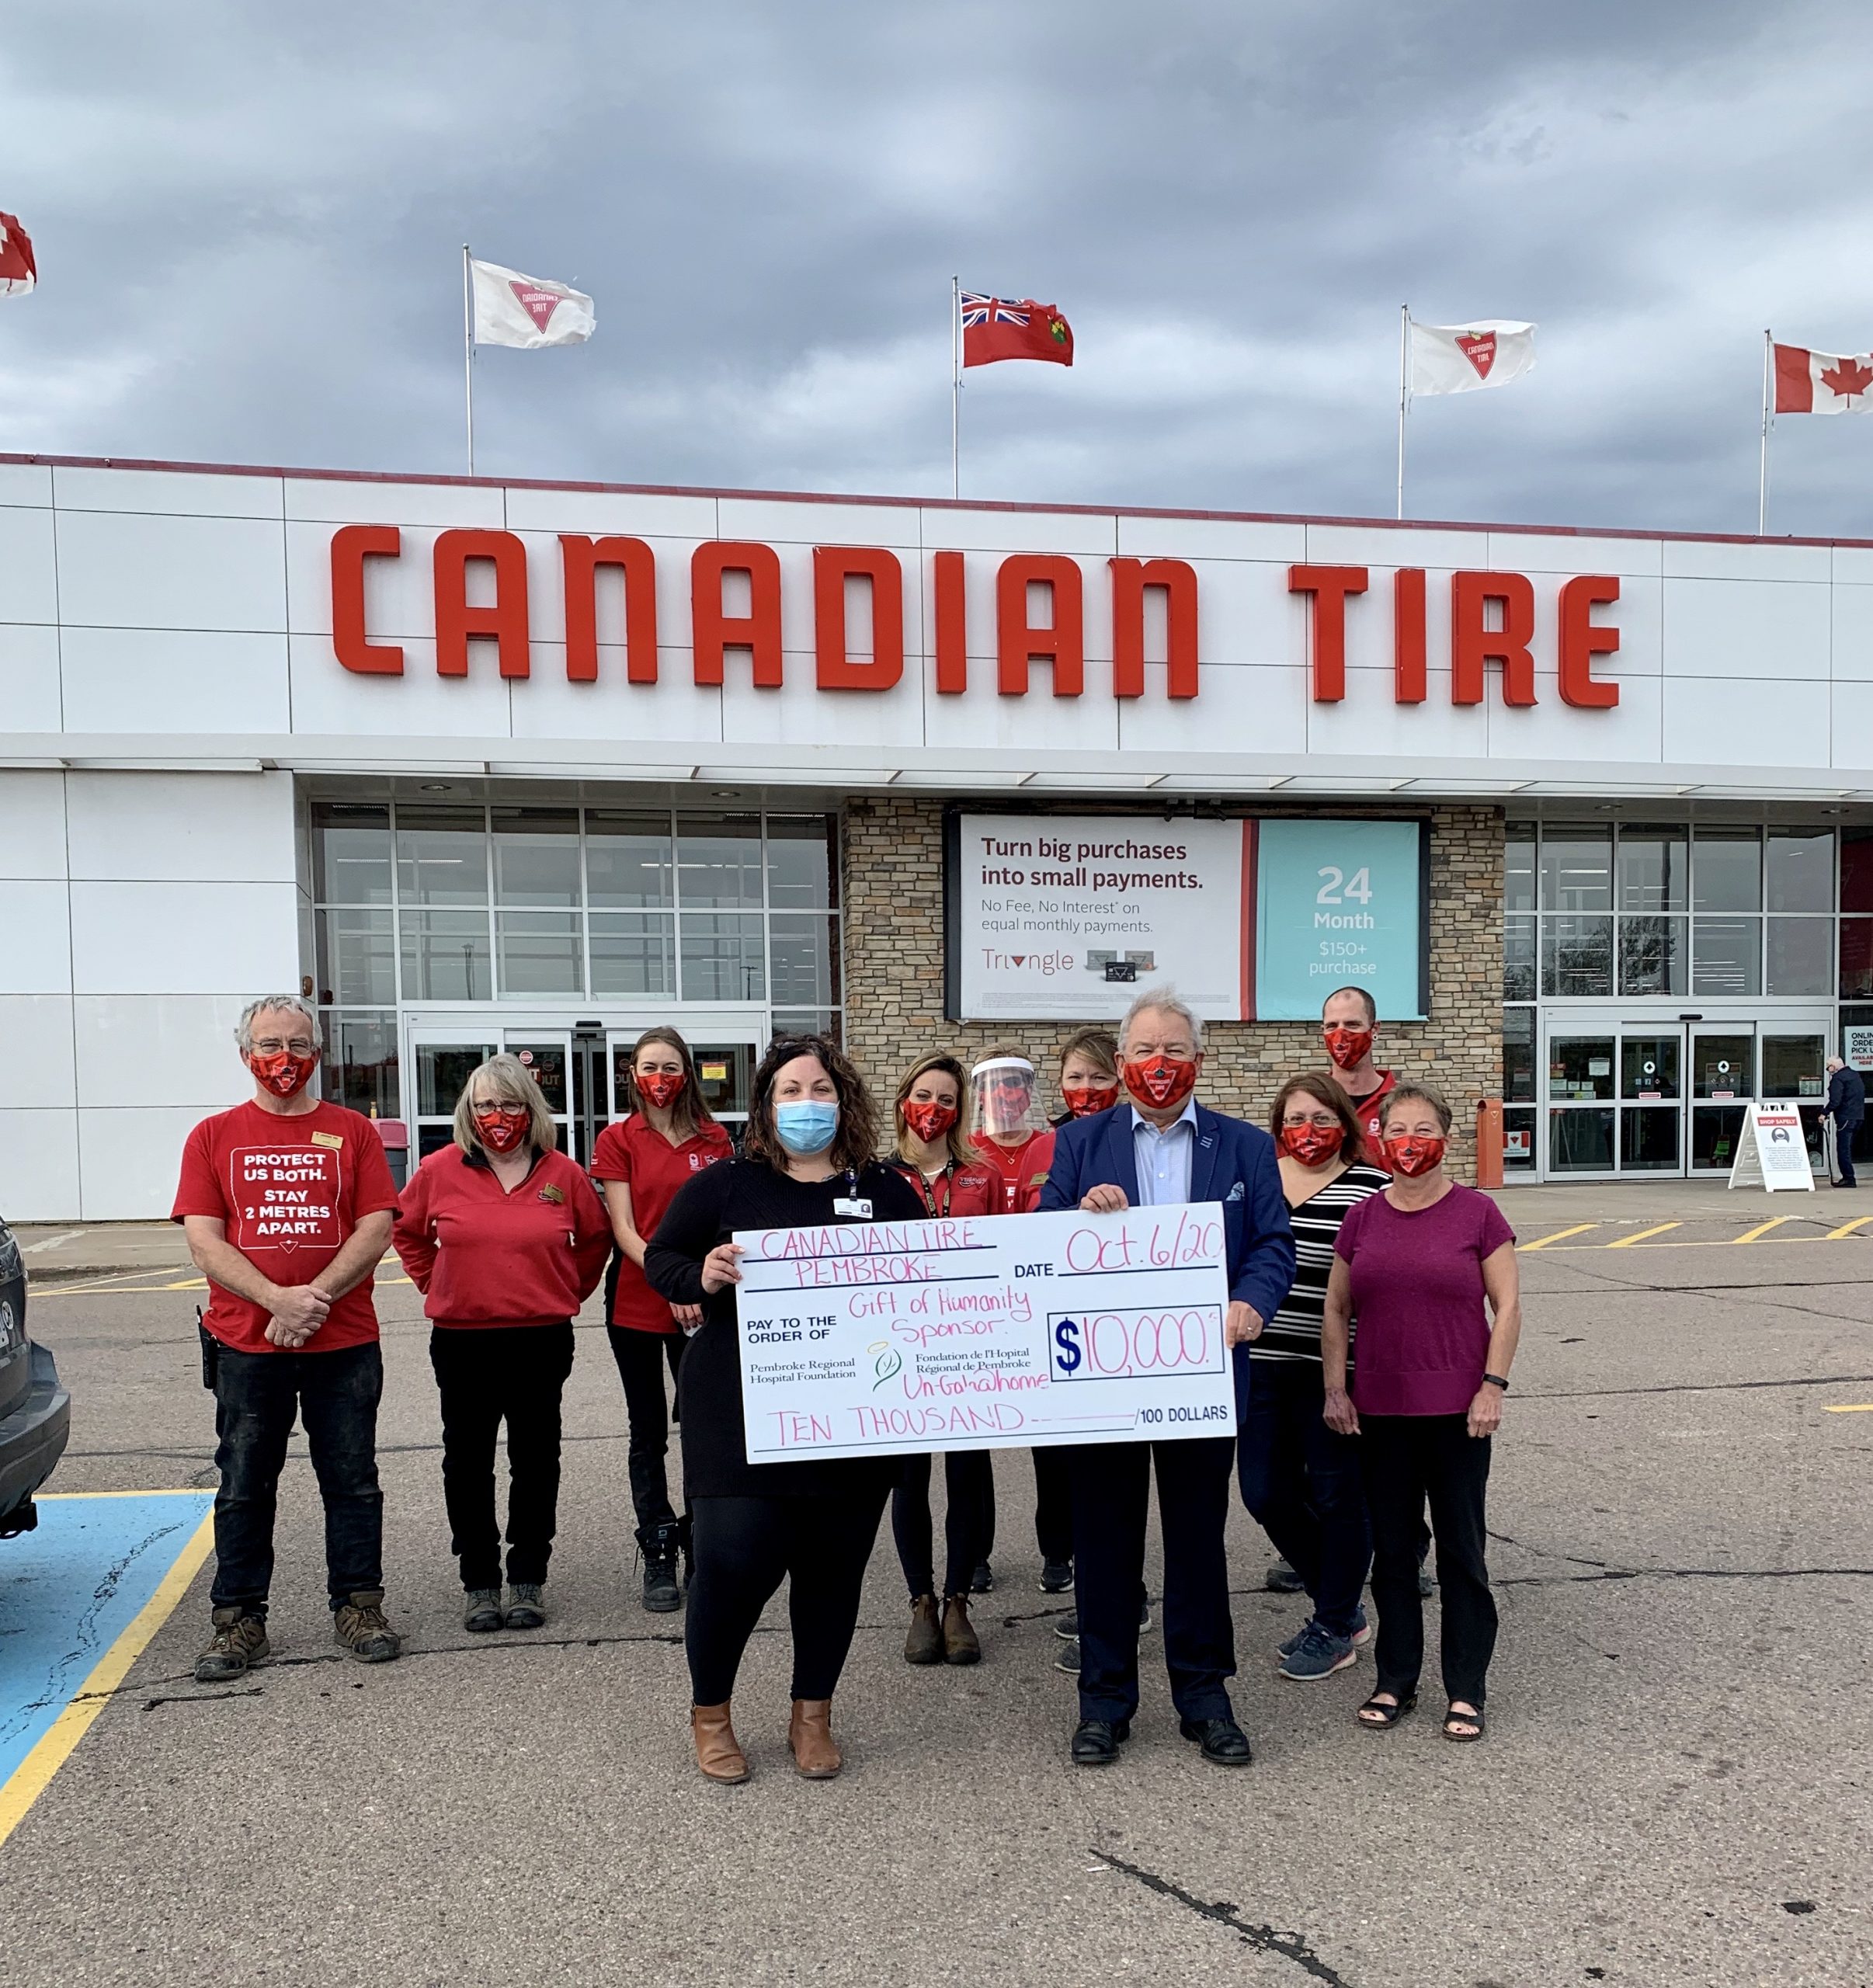 You are currently viewing Canadian Tire Pembroke contributes $10,000 as Gift of Humanity Sponsor of the Pembroke Regional Hospital Foundation’s 2020 Un-Gala @ Home event